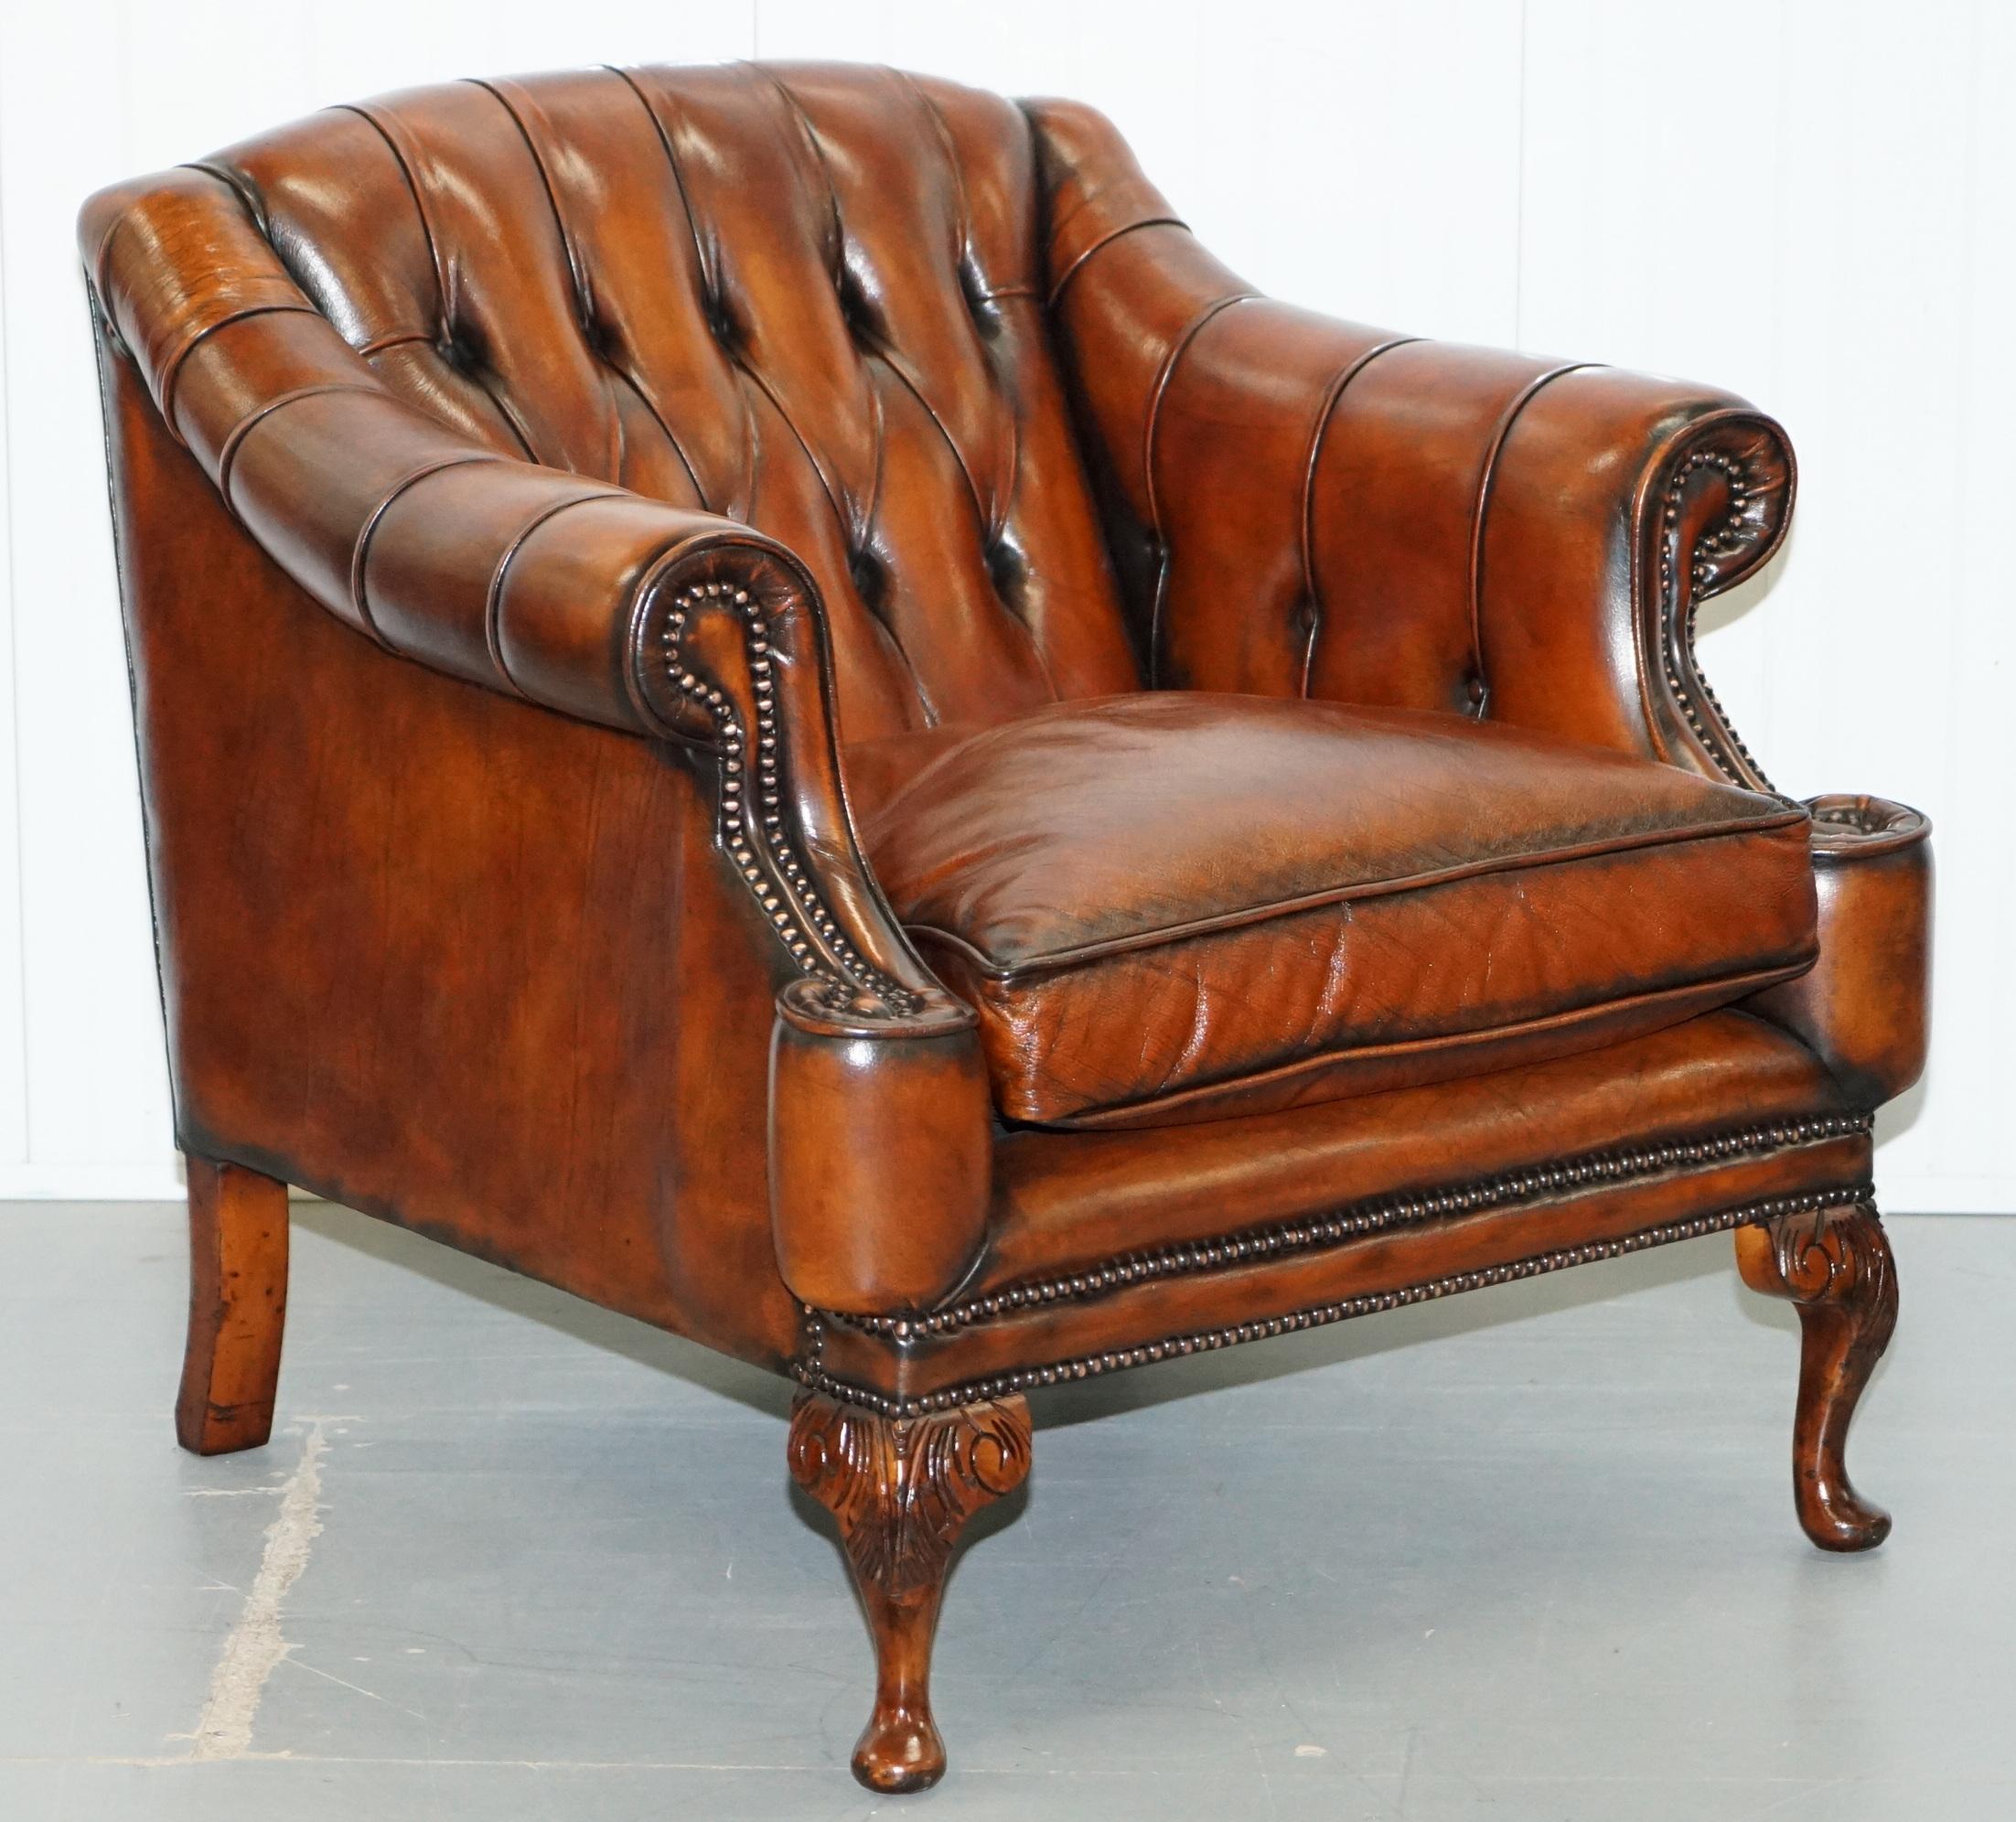 We are is delighted to offer for sale this very rare Lutyen’s Viceroy style Chesterfield fully restored hand dyed Whiskey brown leather three piece suite 

Please note the delivery fee listed is just a guide, it covers within the M25 only

This